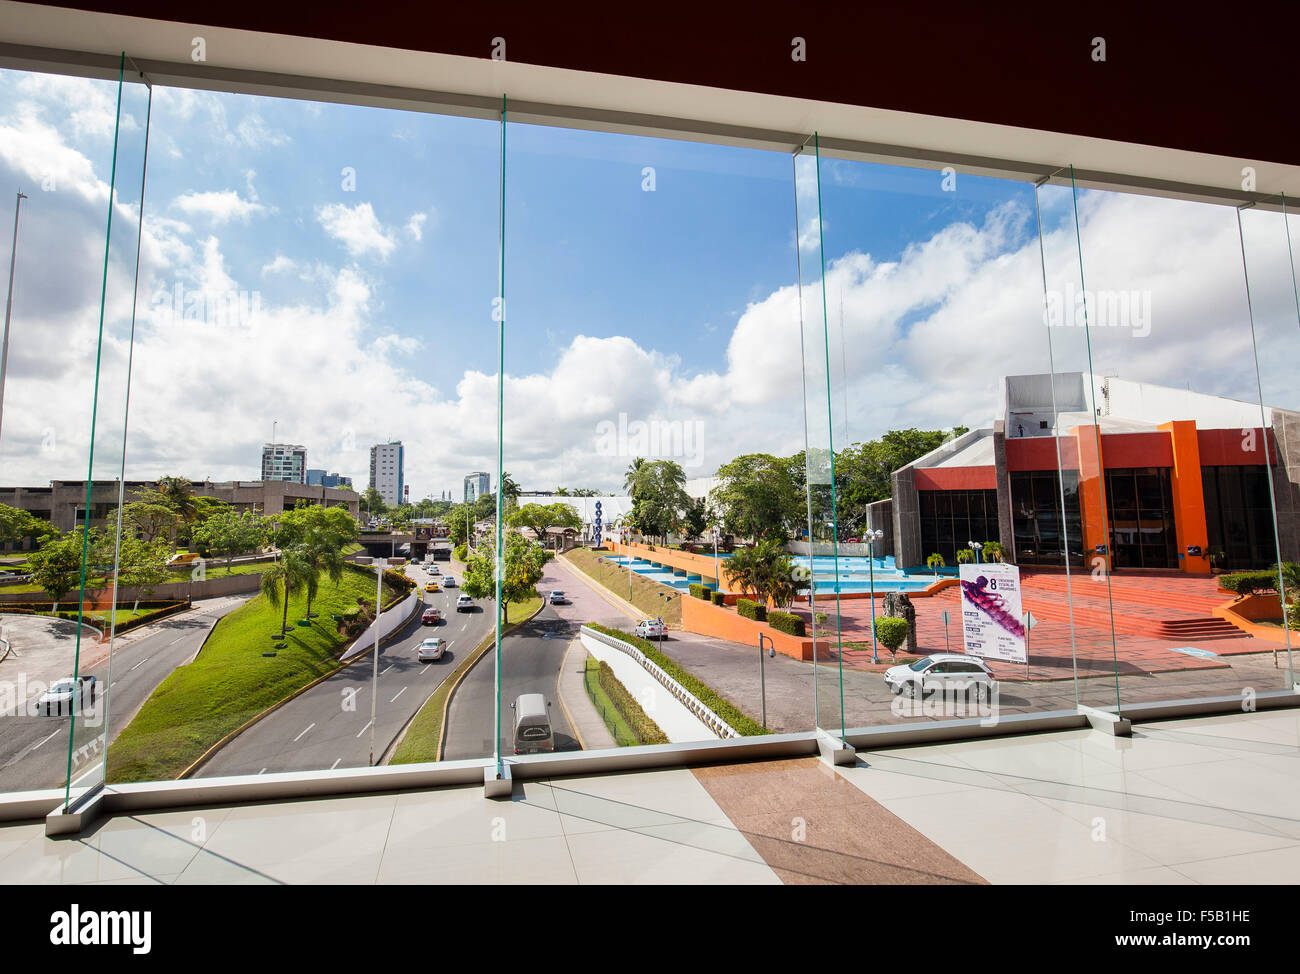 Paseo Tabasco as seen from inside the Galerias mall in the modern district of Villahermosa, Tabasco, Mexico. Stock Photo